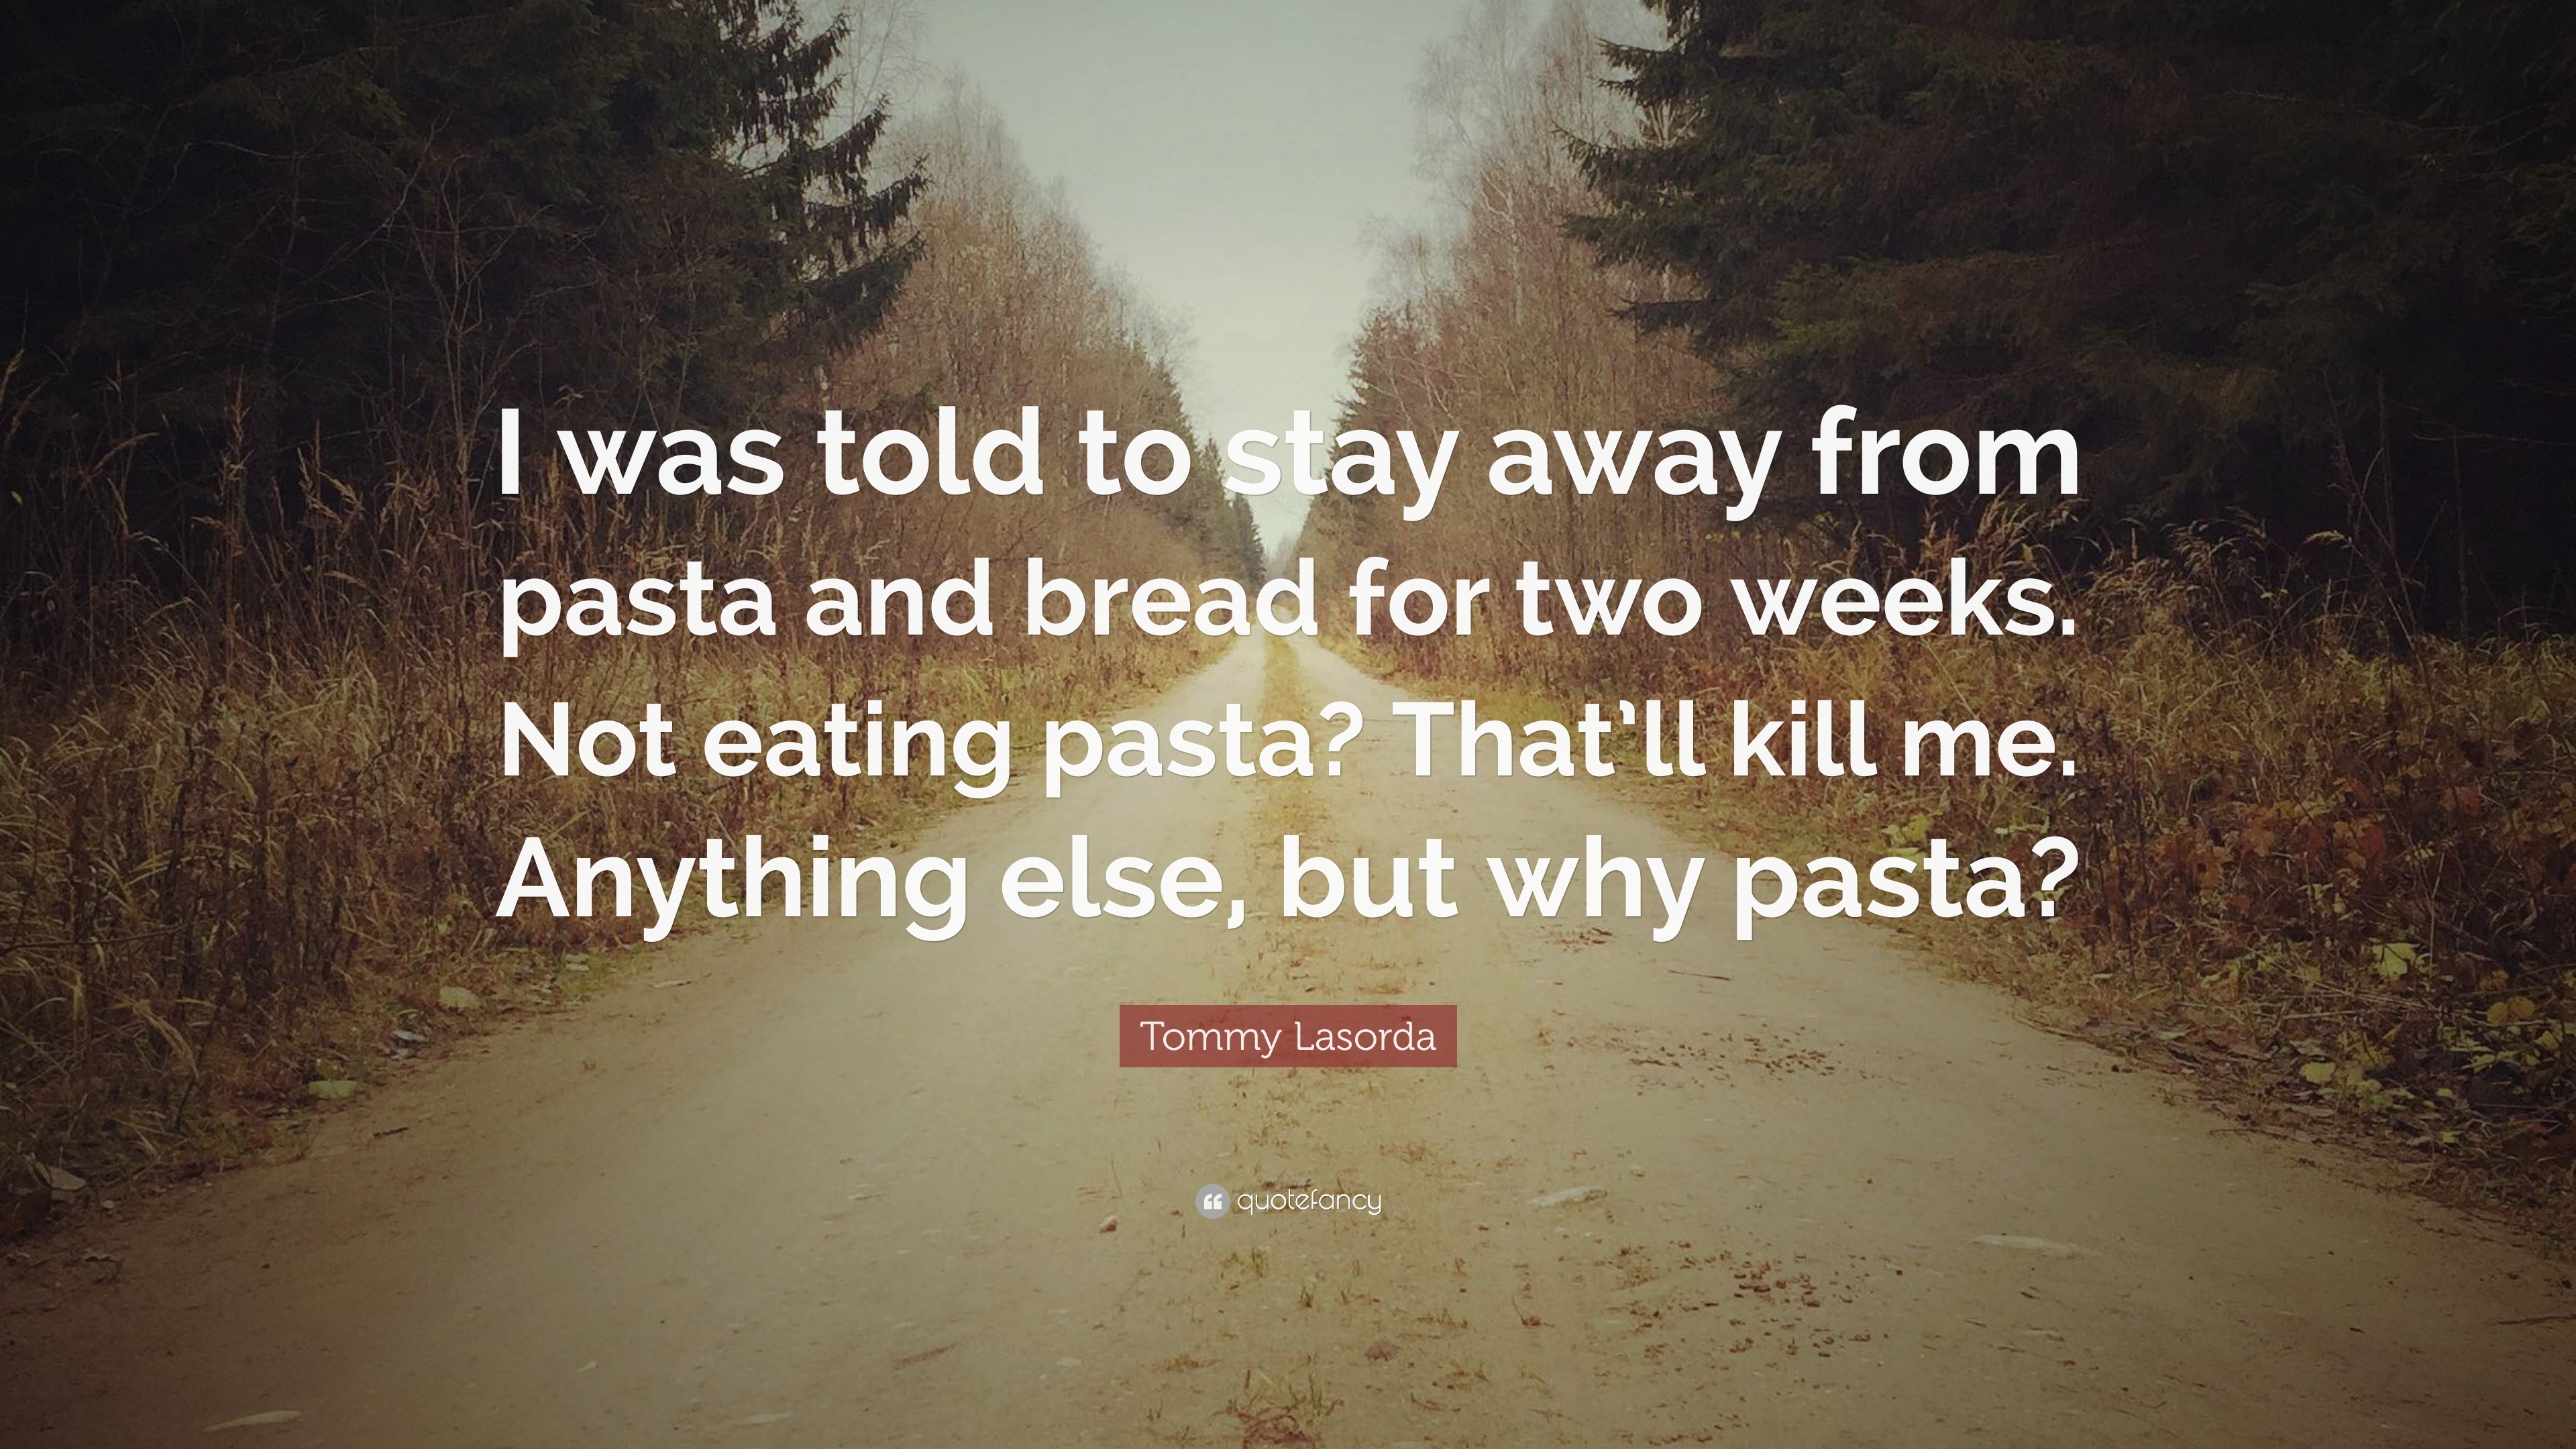 Tommy Lasorda Quote: “I was told to stay away from pasta and bread